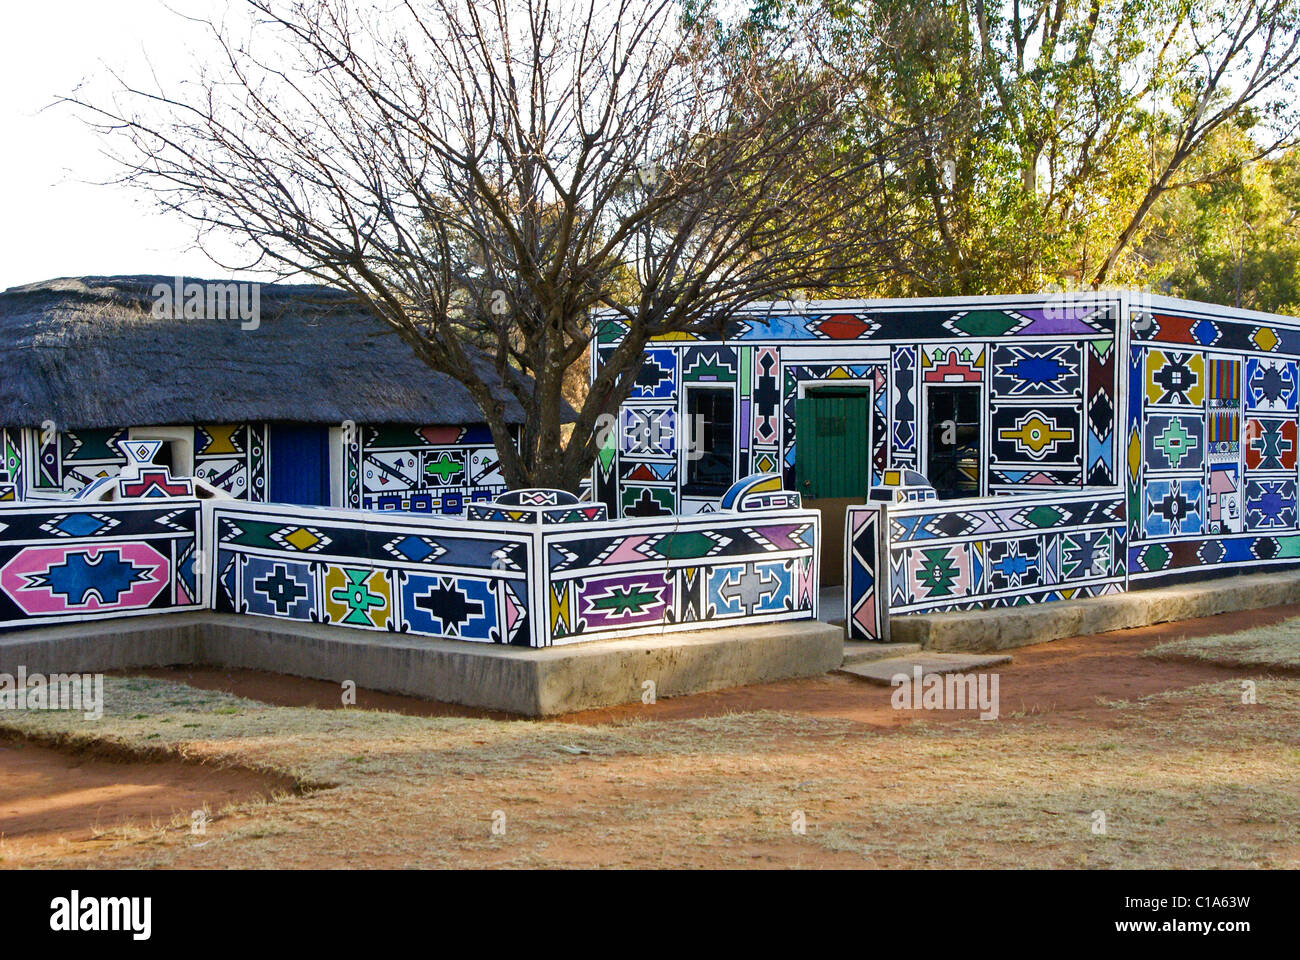 Traditional Ndebele geometric design on house, South Africa Stock Photo